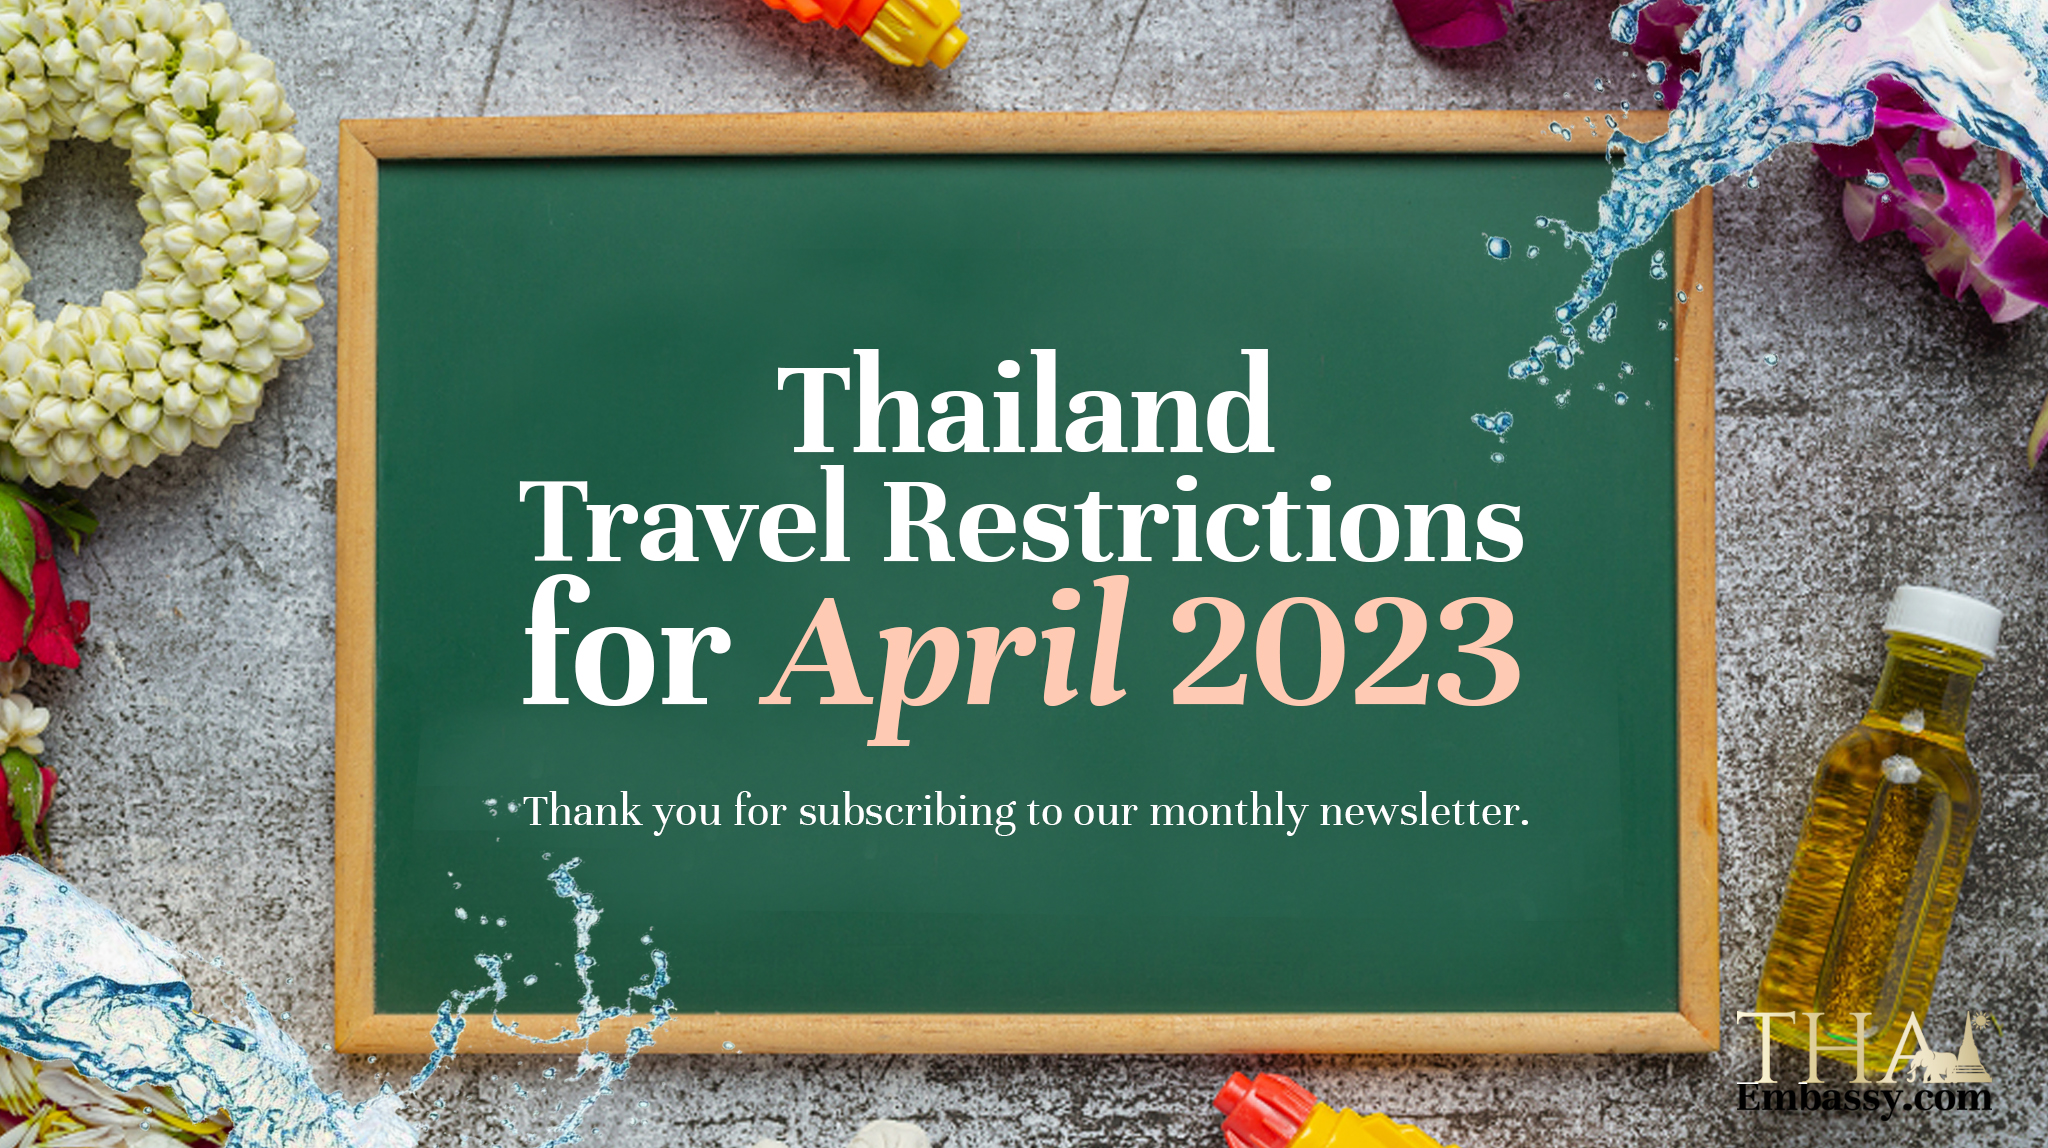 travelling to thailand restrictions 2023